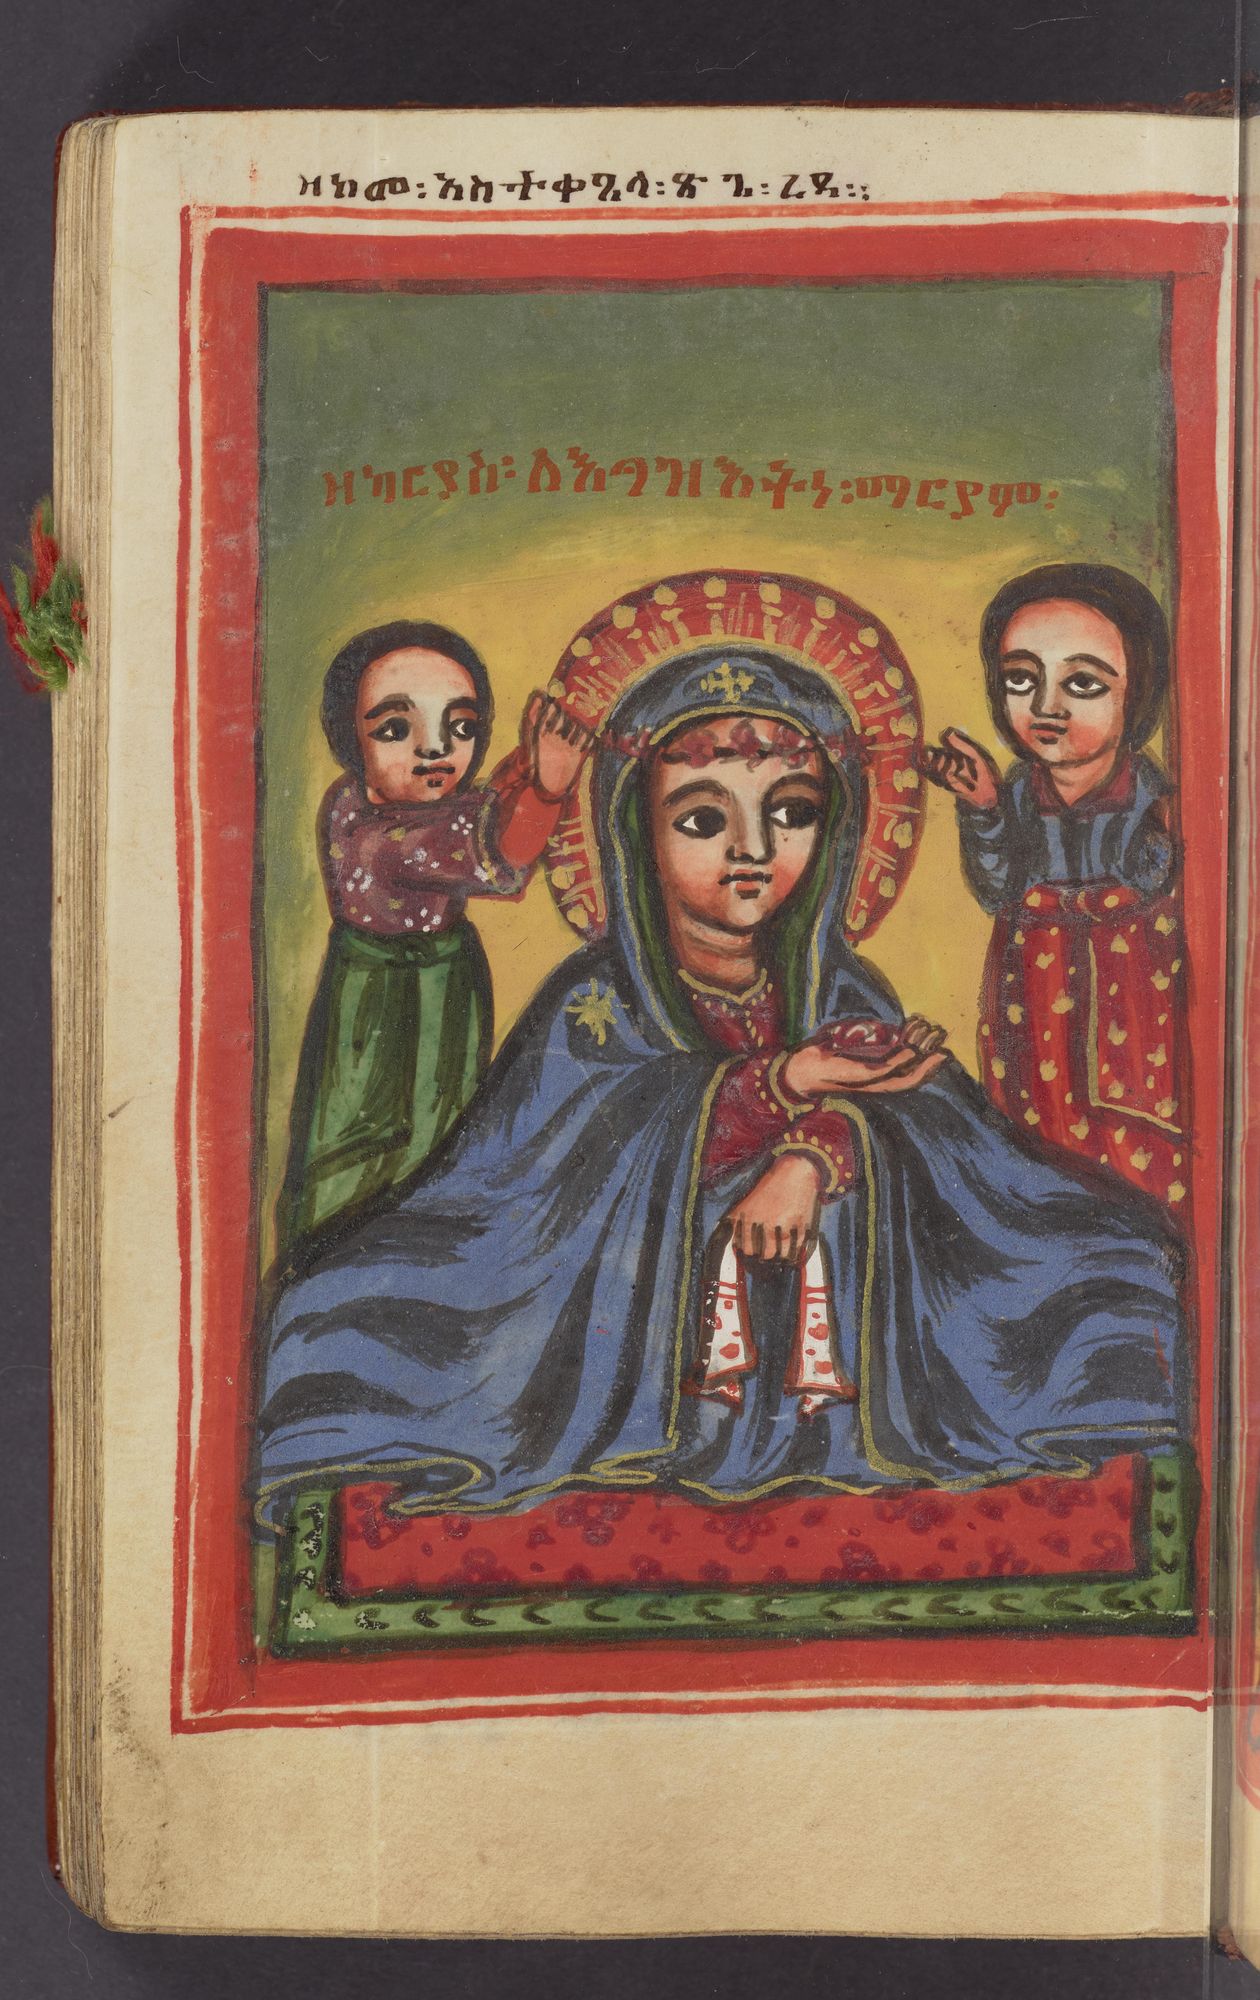 Image of Mary being crowned with roses